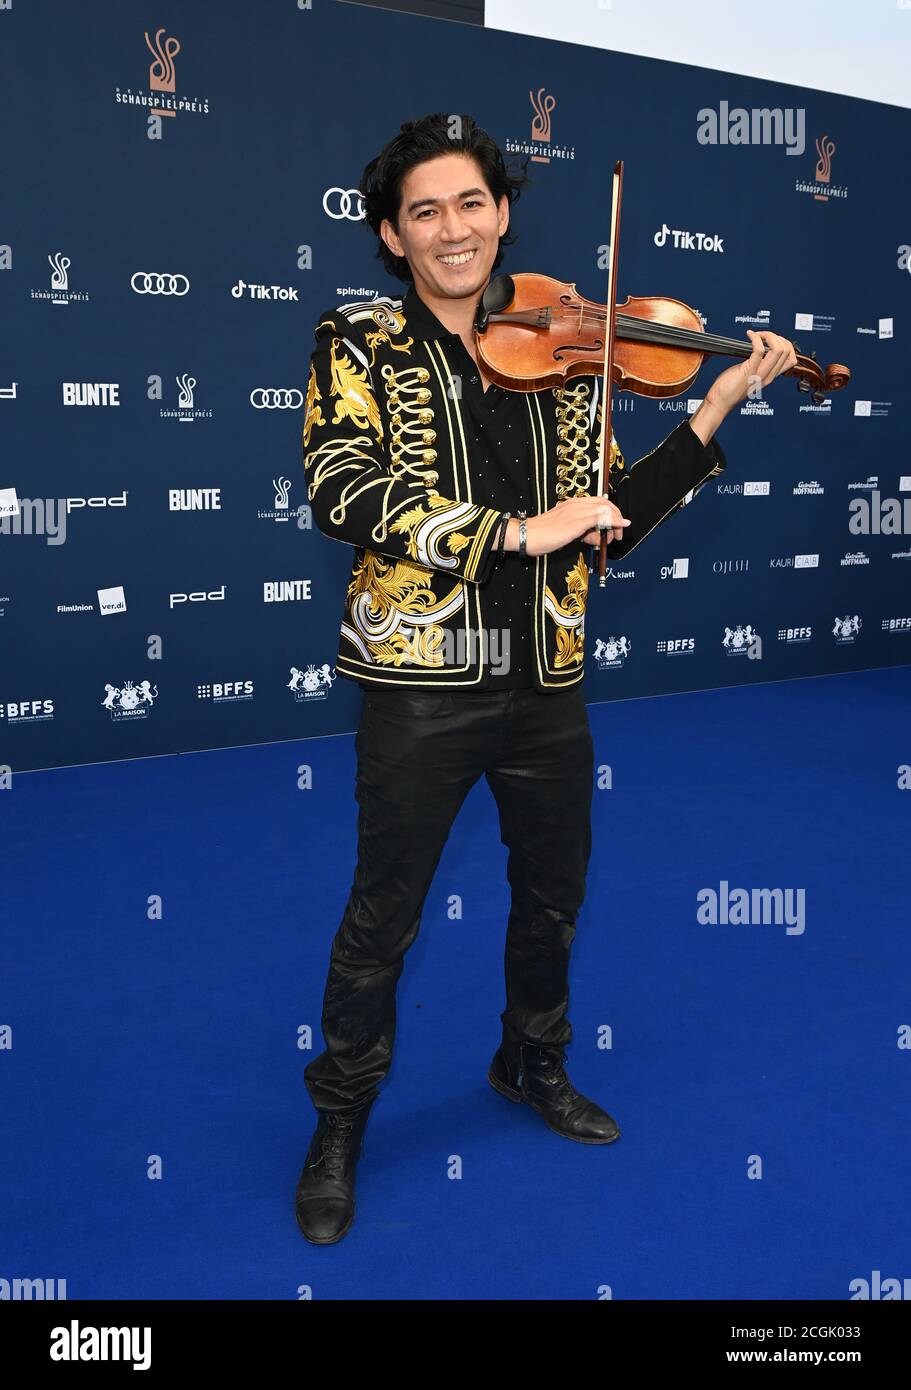 Berlin, Germany. 11th Sep, 2020. The violinist Iskandar Widjaja comes to the presentation of the German Acting Prize. The award has been presented by the German Federal Association of Actors (BFFS) since 2012. Credit: Jens Kalaene/dpa-Zentralbild/dpa/Alamy Live News Stock Photo